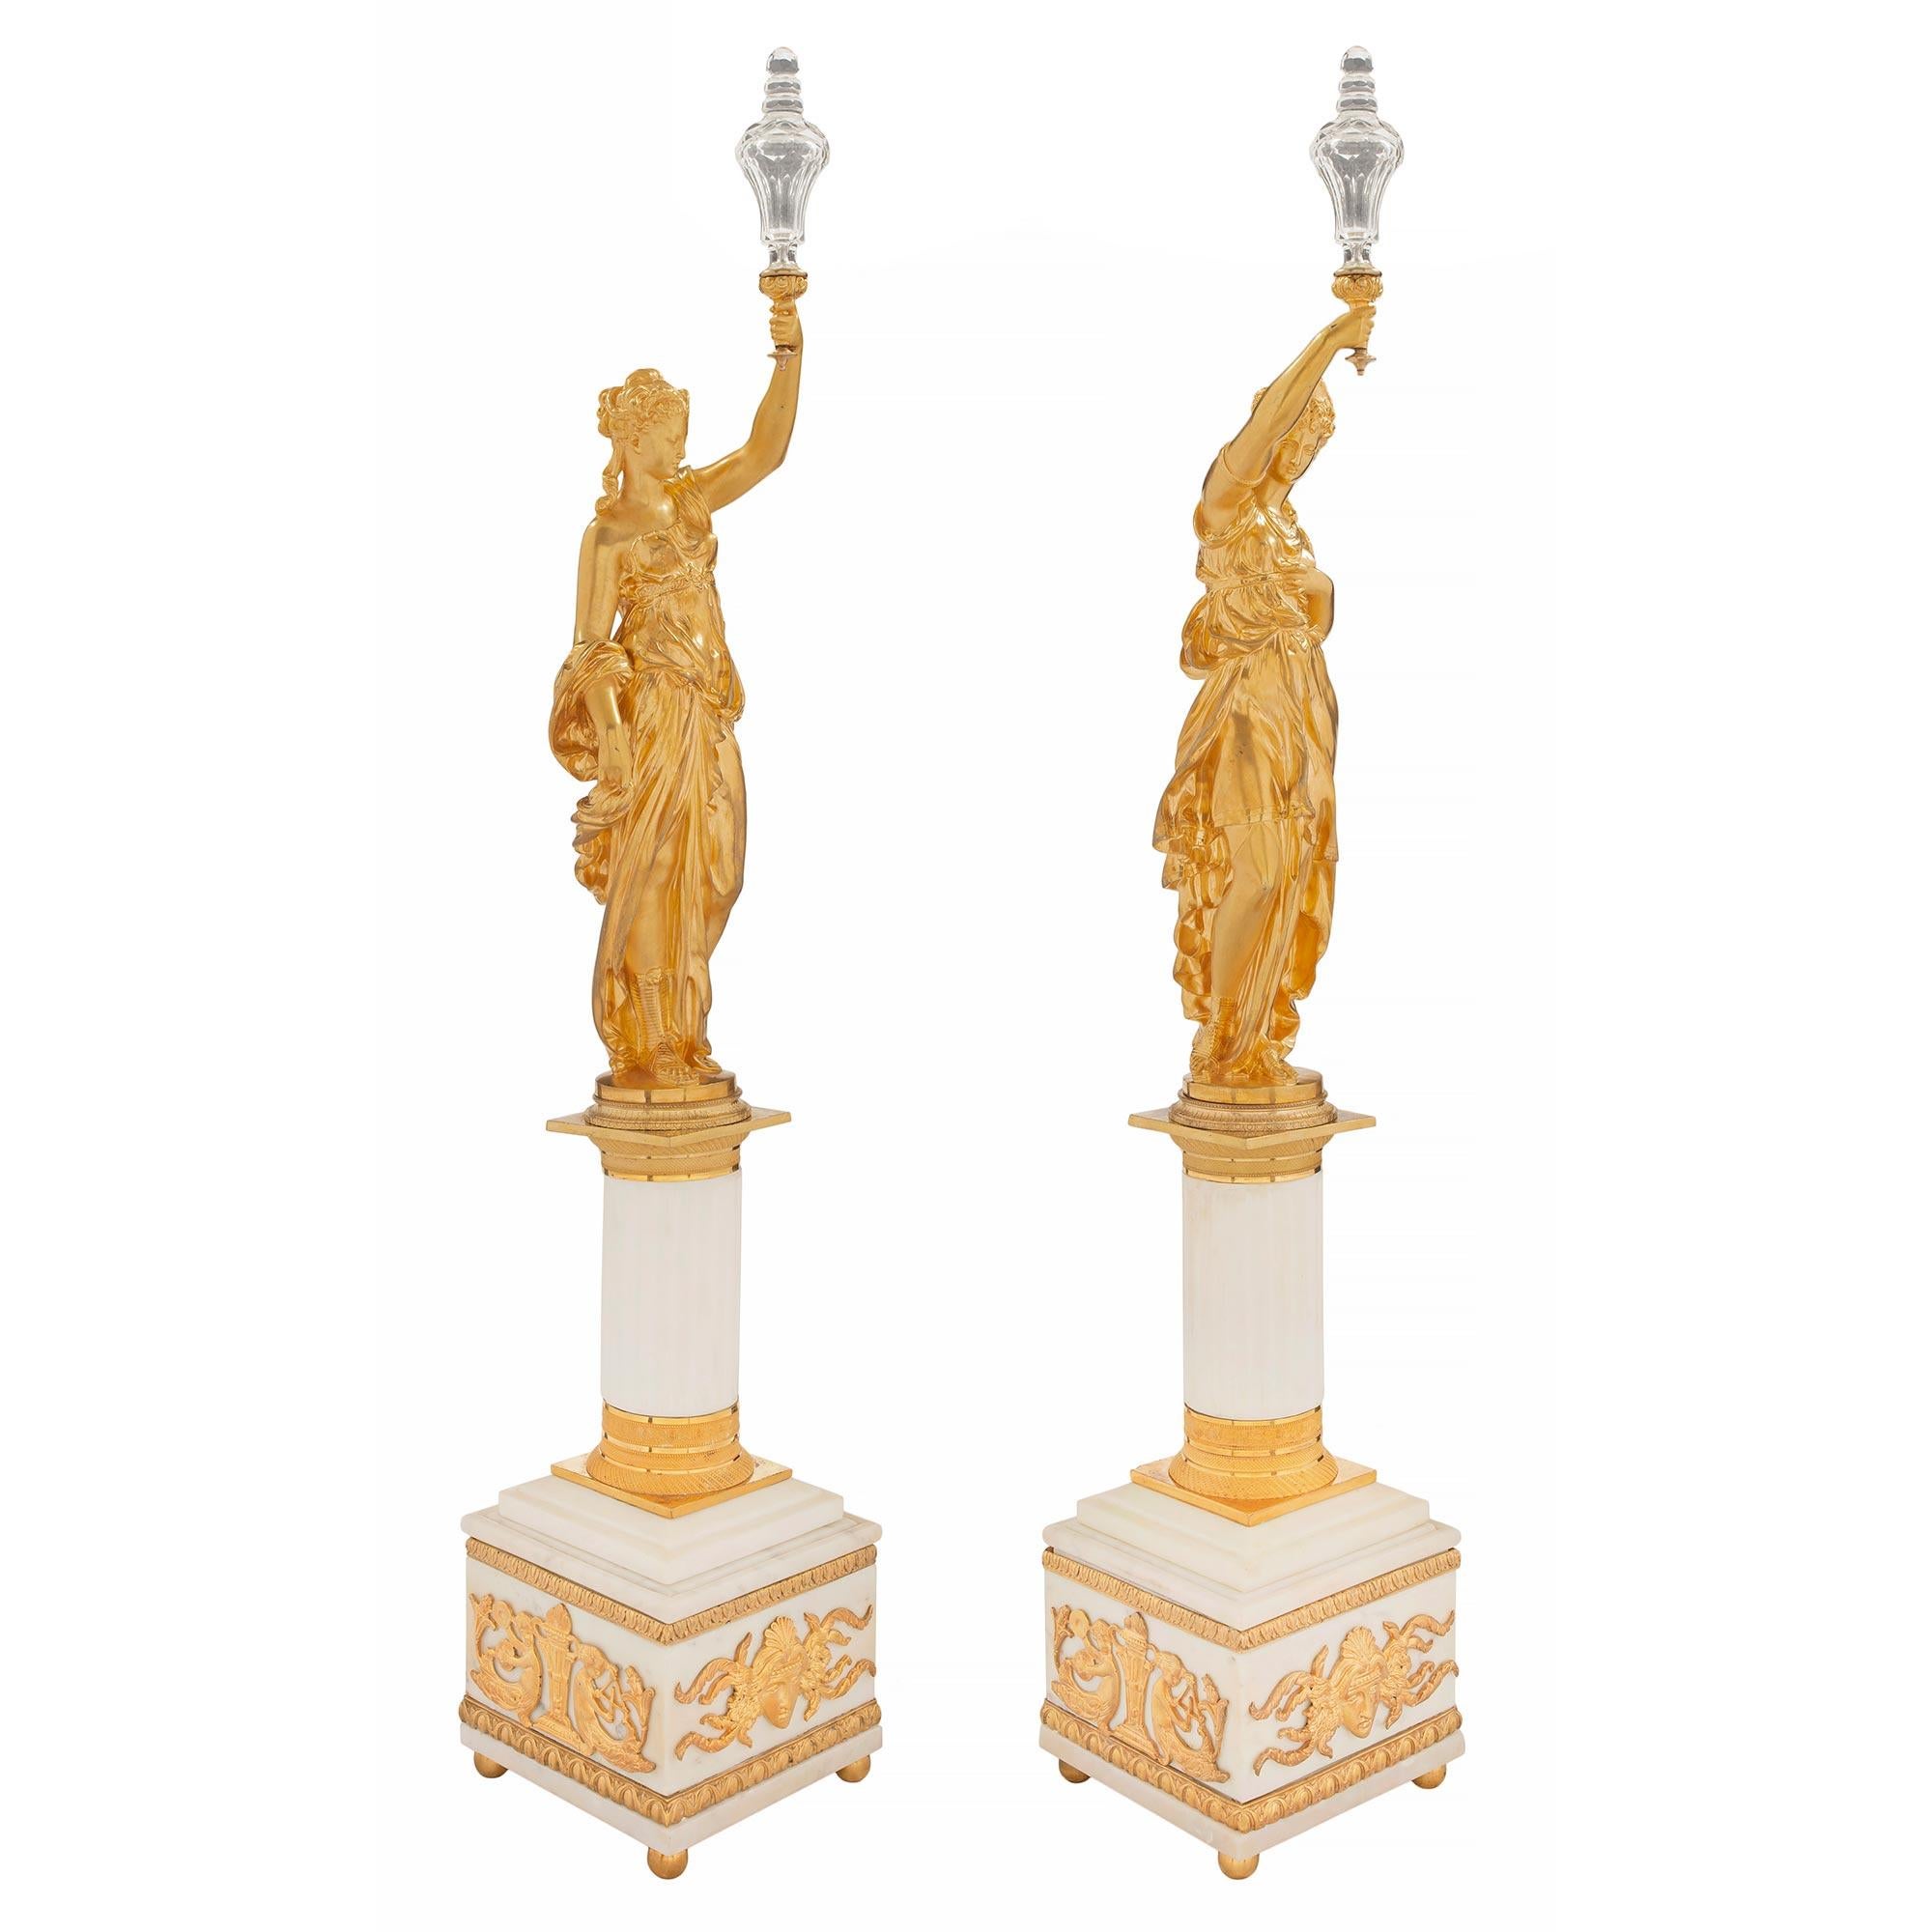 A striking and extremely high-quality true pair of French 19th century Louis XVI st. Belle Époque Period white Carrara marble, ormolu and Baccarat crystal statues. Each statue is raised by ormolu ball feet below the square white Carrara marble